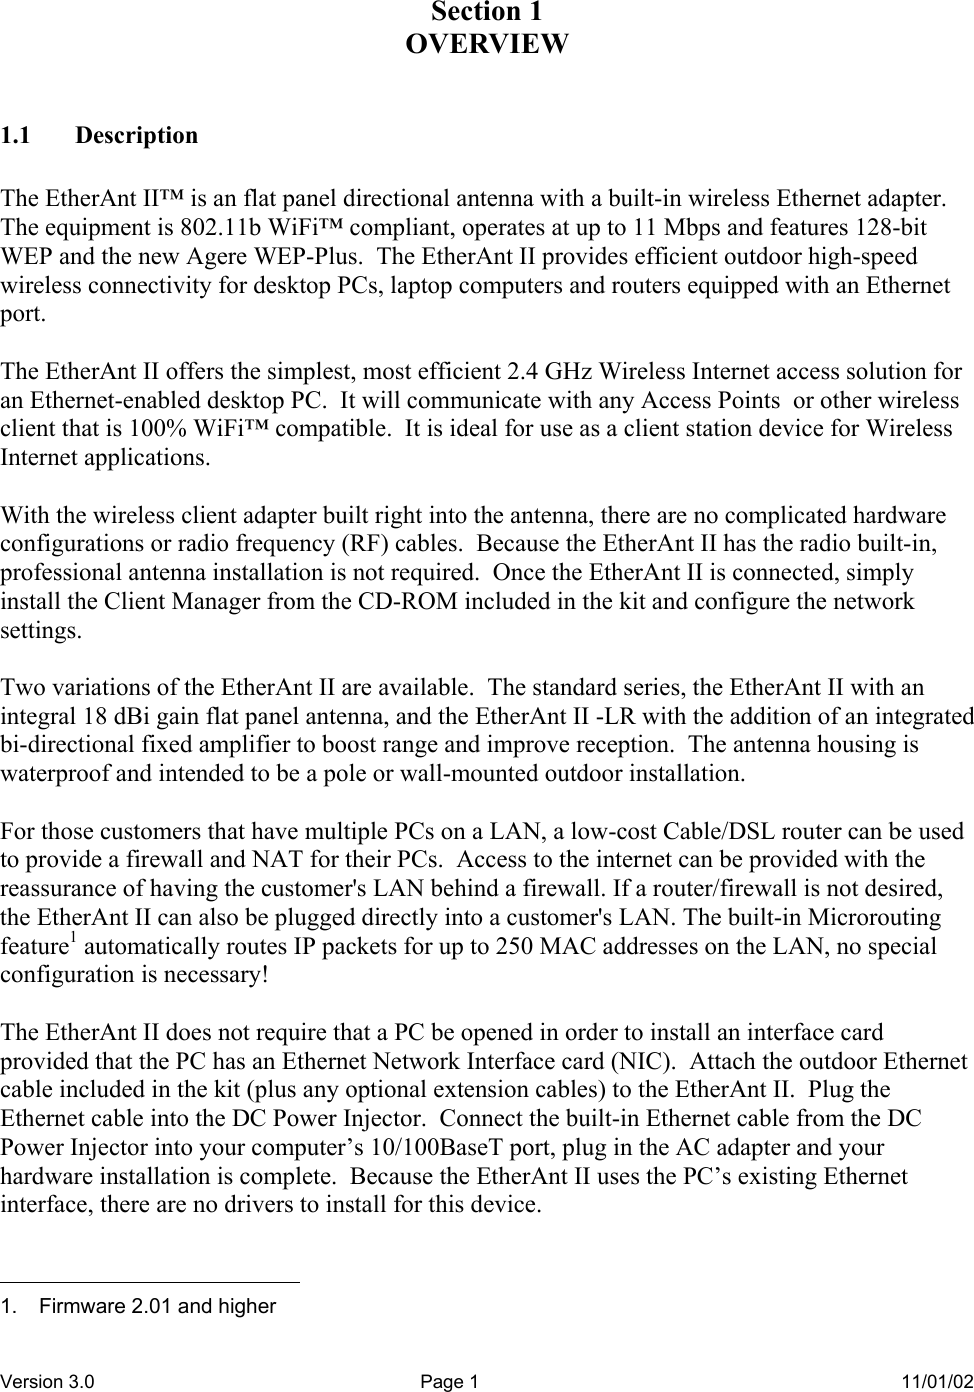 Version 3.0  Page 1  11/01/02 Section 1 OVERVIEW  1.1 Description  The EtherAnt II™ is an flat panel directional antenna with a built-in wireless Ethernet adapter.  The equipment is 802.11b WiFi™ compliant, operates at up to 11 Mbps and features 128-bit WEP and the new Agere WEP-Plus.  The EtherAnt II provides efficient outdoor high-speed wireless connectivity for desktop PCs, laptop computers and routers equipped with an Ethernet port.  The EtherAnt II offers the simplest, most efficient 2.4 GHz Wireless Internet access solution for an Ethernet-enabled desktop PC.  It will communicate with any Access Points  or other wireless client that is 100% WiFi™ compatible.  It is ideal for use as a client station device for Wireless Internet applications.  With the wireless client adapter built right into the antenna, there are no complicated hardware configurations or radio frequency (RF) cables.  Because the EtherAnt II has the radio built-in, professional antenna installation is not required.  Once the EtherAnt II is connected, simply install the Client Manager from the CD-ROM included in the kit and configure the network settings.  Two variations of the EtherAnt II are available.  The standard series, the EtherAnt II with an integral 18 dBi gain flat panel antenna, and the EtherAnt II -LR with the addition of an integrated bi-directional fixed amplifier to boost range and improve reception.  The antenna housing is waterproof and intended to be a pole or wall-mounted outdoor installation.  For those customers that have multiple PCs on a LAN, a low-cost Cable/DSL router can be used to provide a firewall and NAT for their PCs.  Access to the internet can be provided with the reassurance of having the customer&apos;s LAN behind a firewall. If a router/firewall is not desired, the EtherAnt II can also be plugged directly into a customer&apos;s LAN. The built-in Microrouting feature1 automatically routes IP packets for up to 250 MAC addresses on the LAN, no special configuration is necessary!  The EtherAnt II does not require that a PC be opened in order to install an interface card provided that the PC has an Ethernet Network Interface card (NIC).  Attach the outdoor Ethernet cable included in the kit (plus any optional extension cables) to the EtherAnt II.  Plug the Ethernet cable into the DC Power Injector.  Connect the built-in Ethernet cable from the DC Power Injector into your computer’s 10/100BaseT port, plug in the AC adapter and your hardware installation is complete.  Because the EtherAnt II uses the PC’s existing Ethernet interface, there are no drivers to install for this device.                                             1.  Firmware 2.01 and higher 